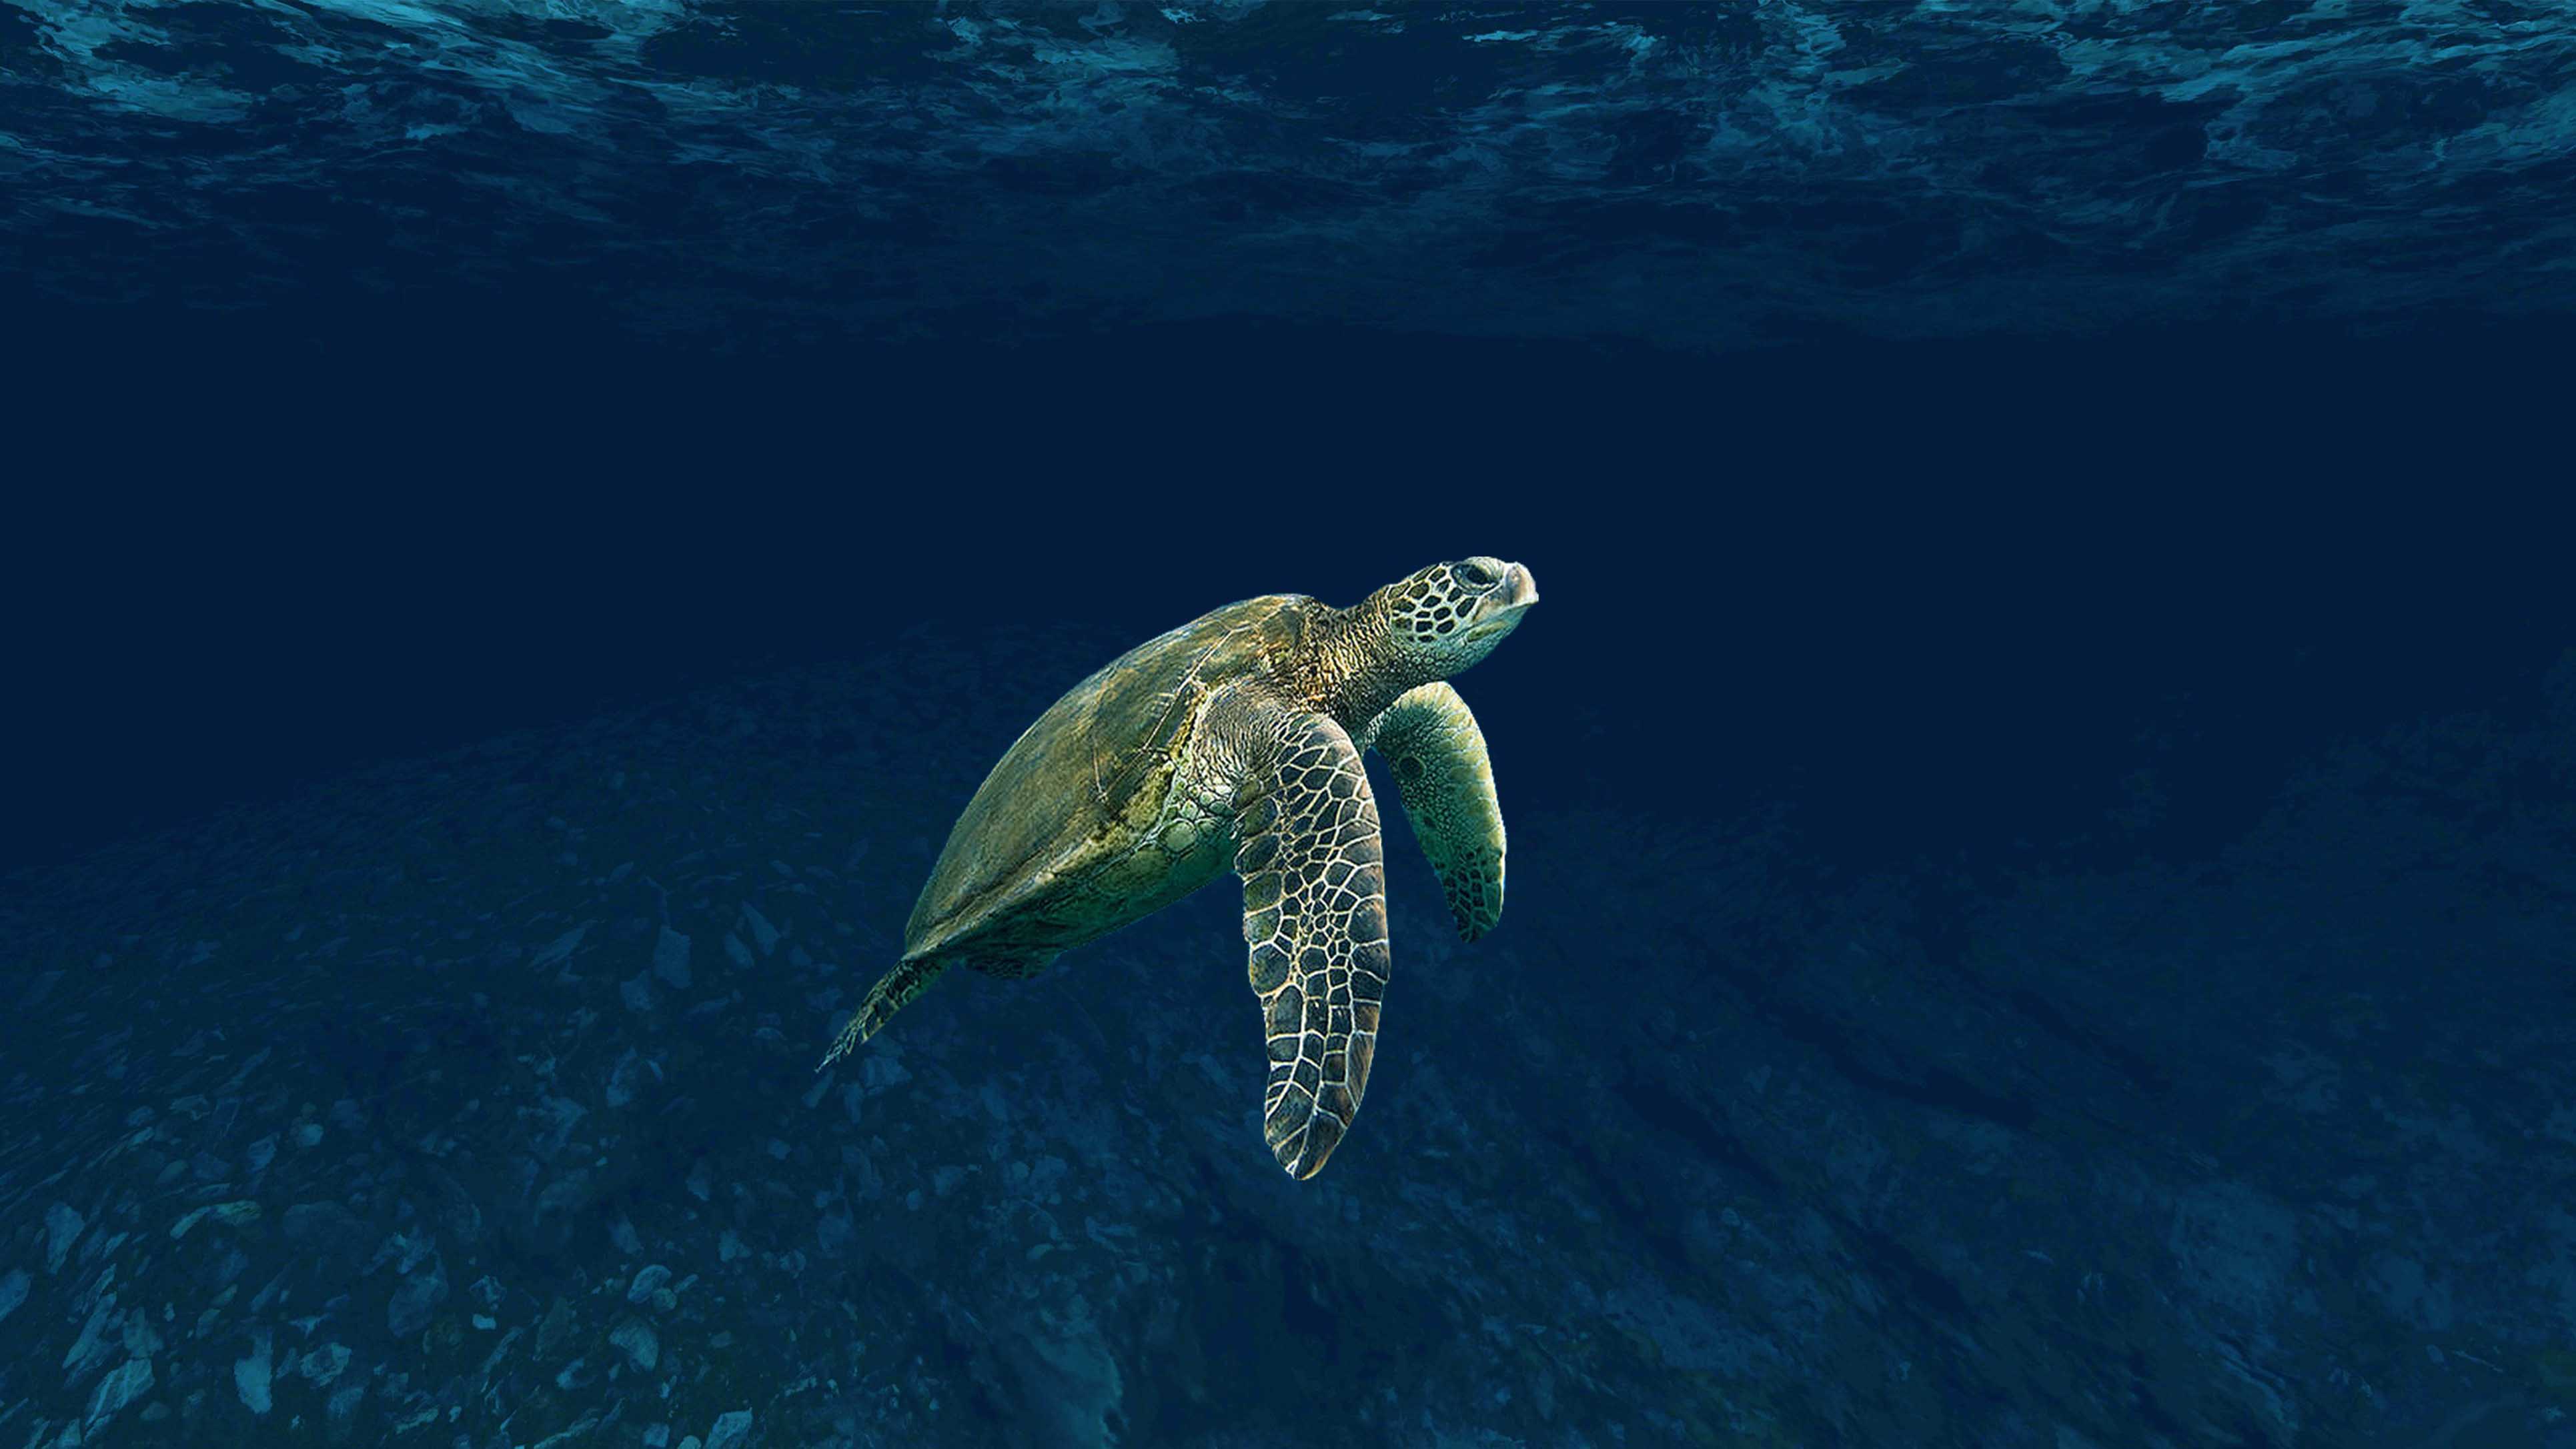 Image of a green turtle swimming in the sea